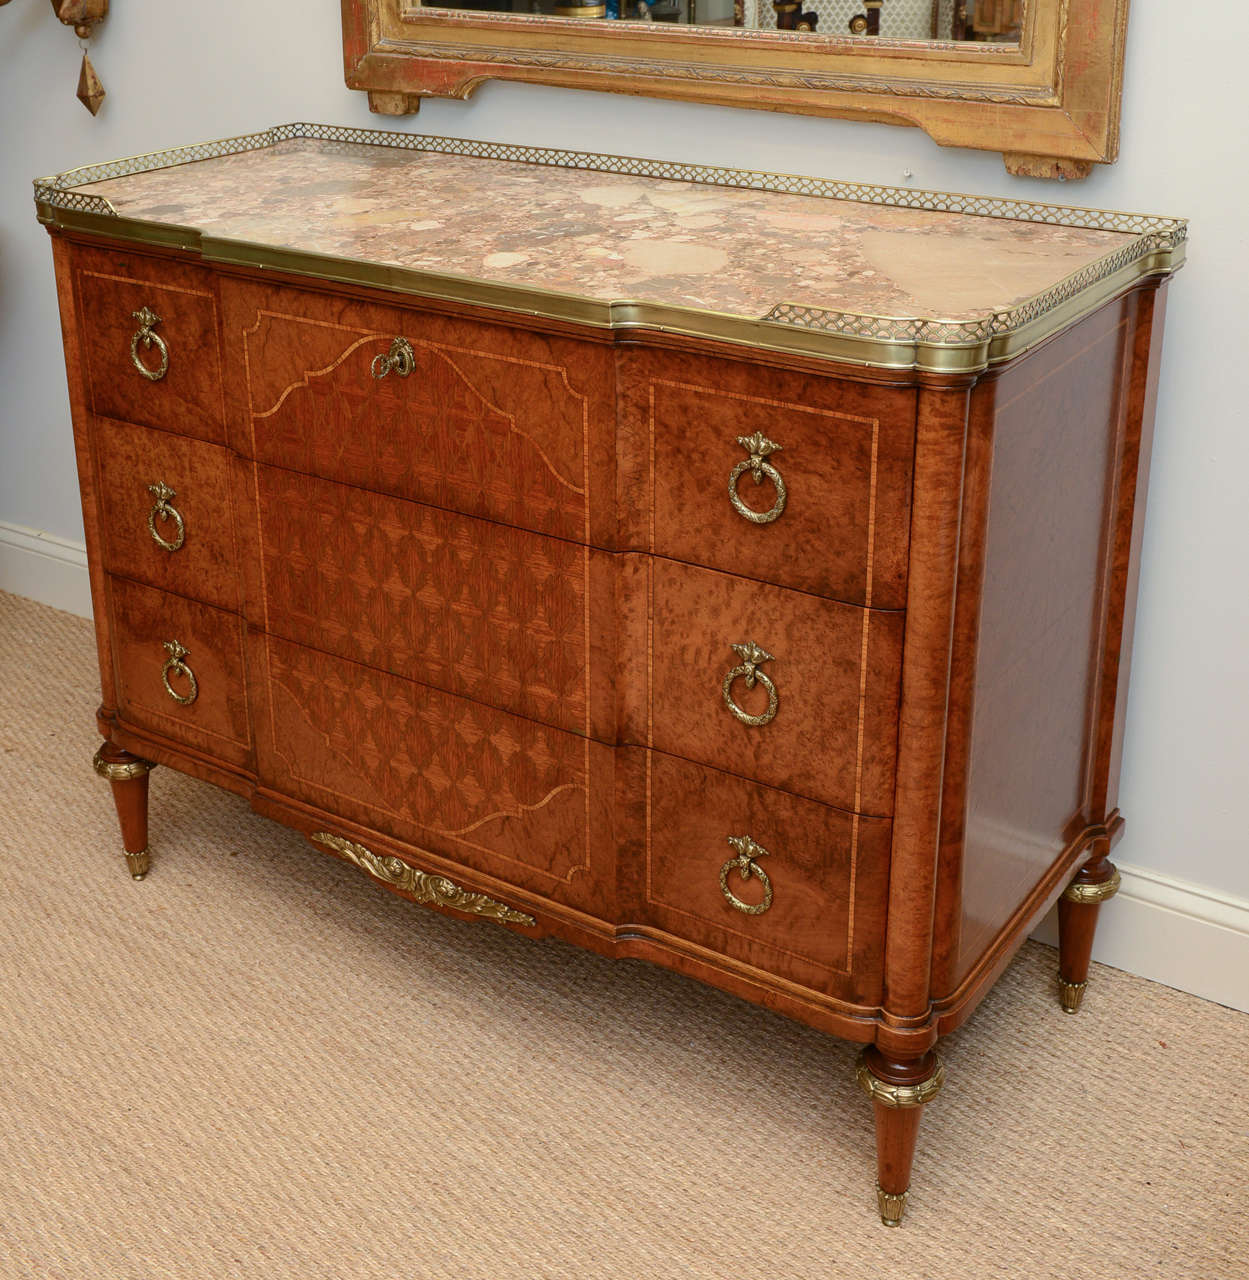 Secretaire, having notched marble top with 3/4 pierced bronze gallery, the top drawer opens to a writing surface and inside, an arrangement of pigeon holes and two central drawers; the case, of burlwood, has stringing and beautifully inlaid designs